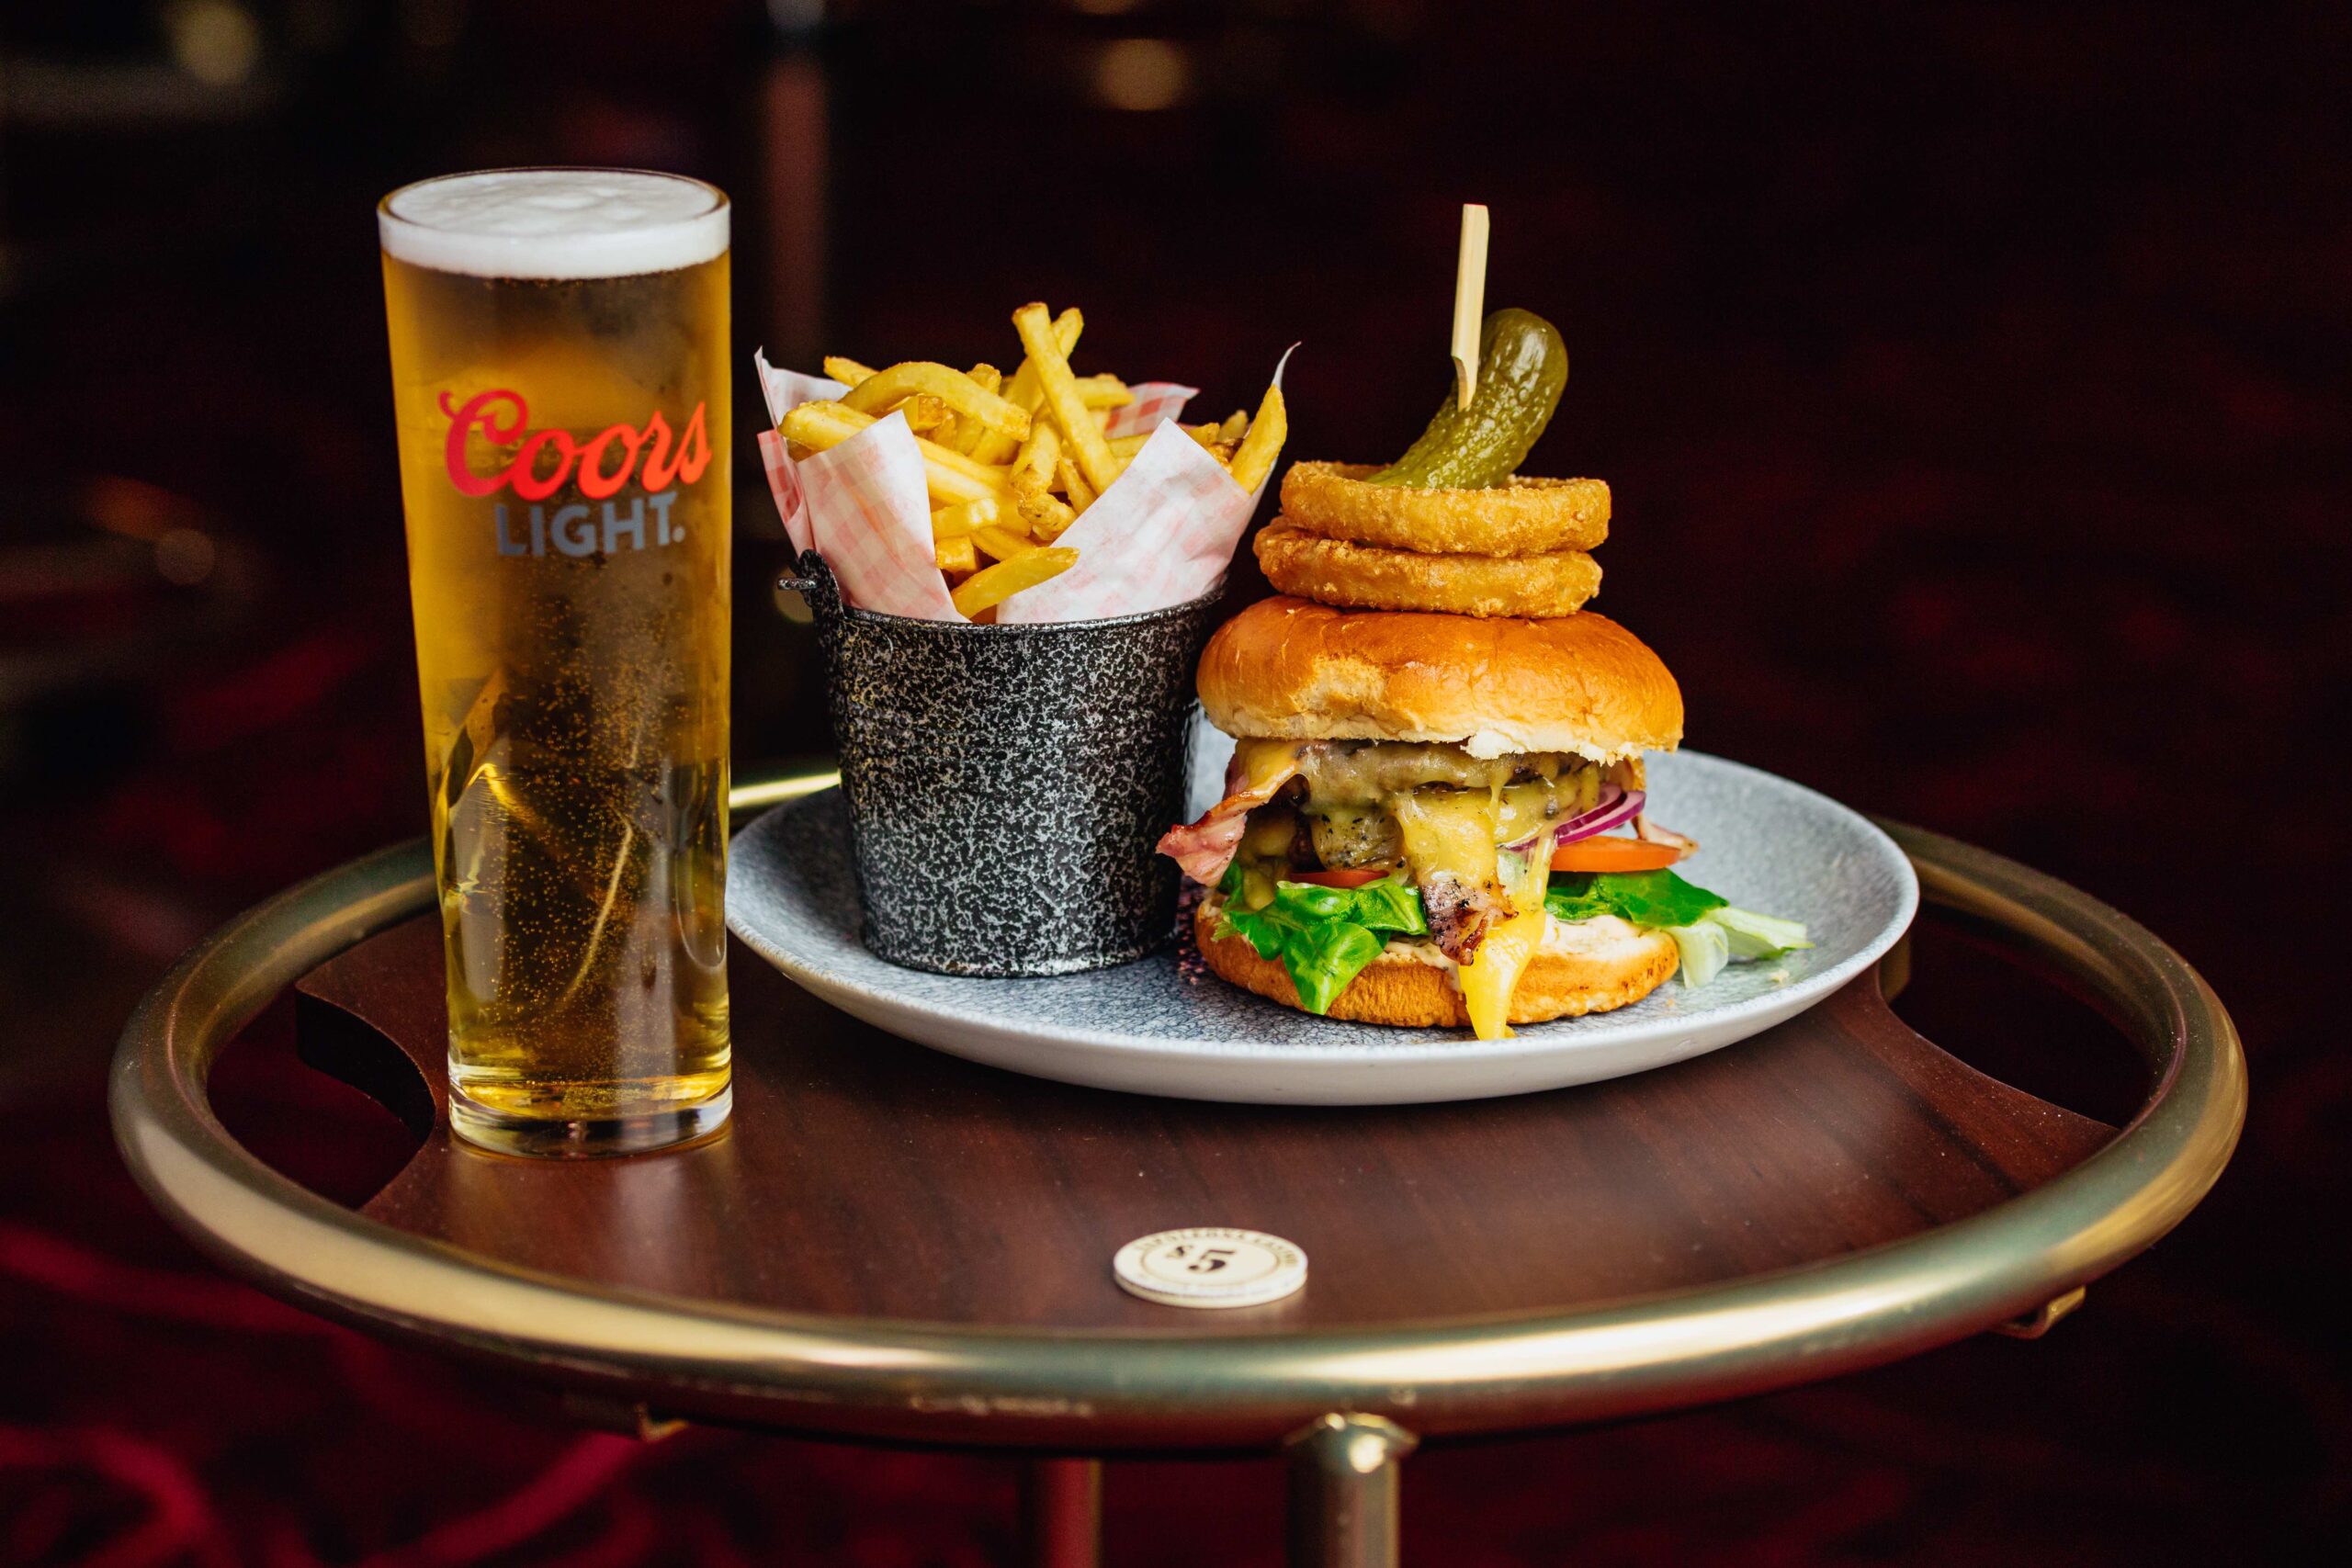 Manchester Food and Drink Offers at Napoleons Casino and Restaurant - Manchester Food and Drink Offers - Napoleons Casinos & Restaurants